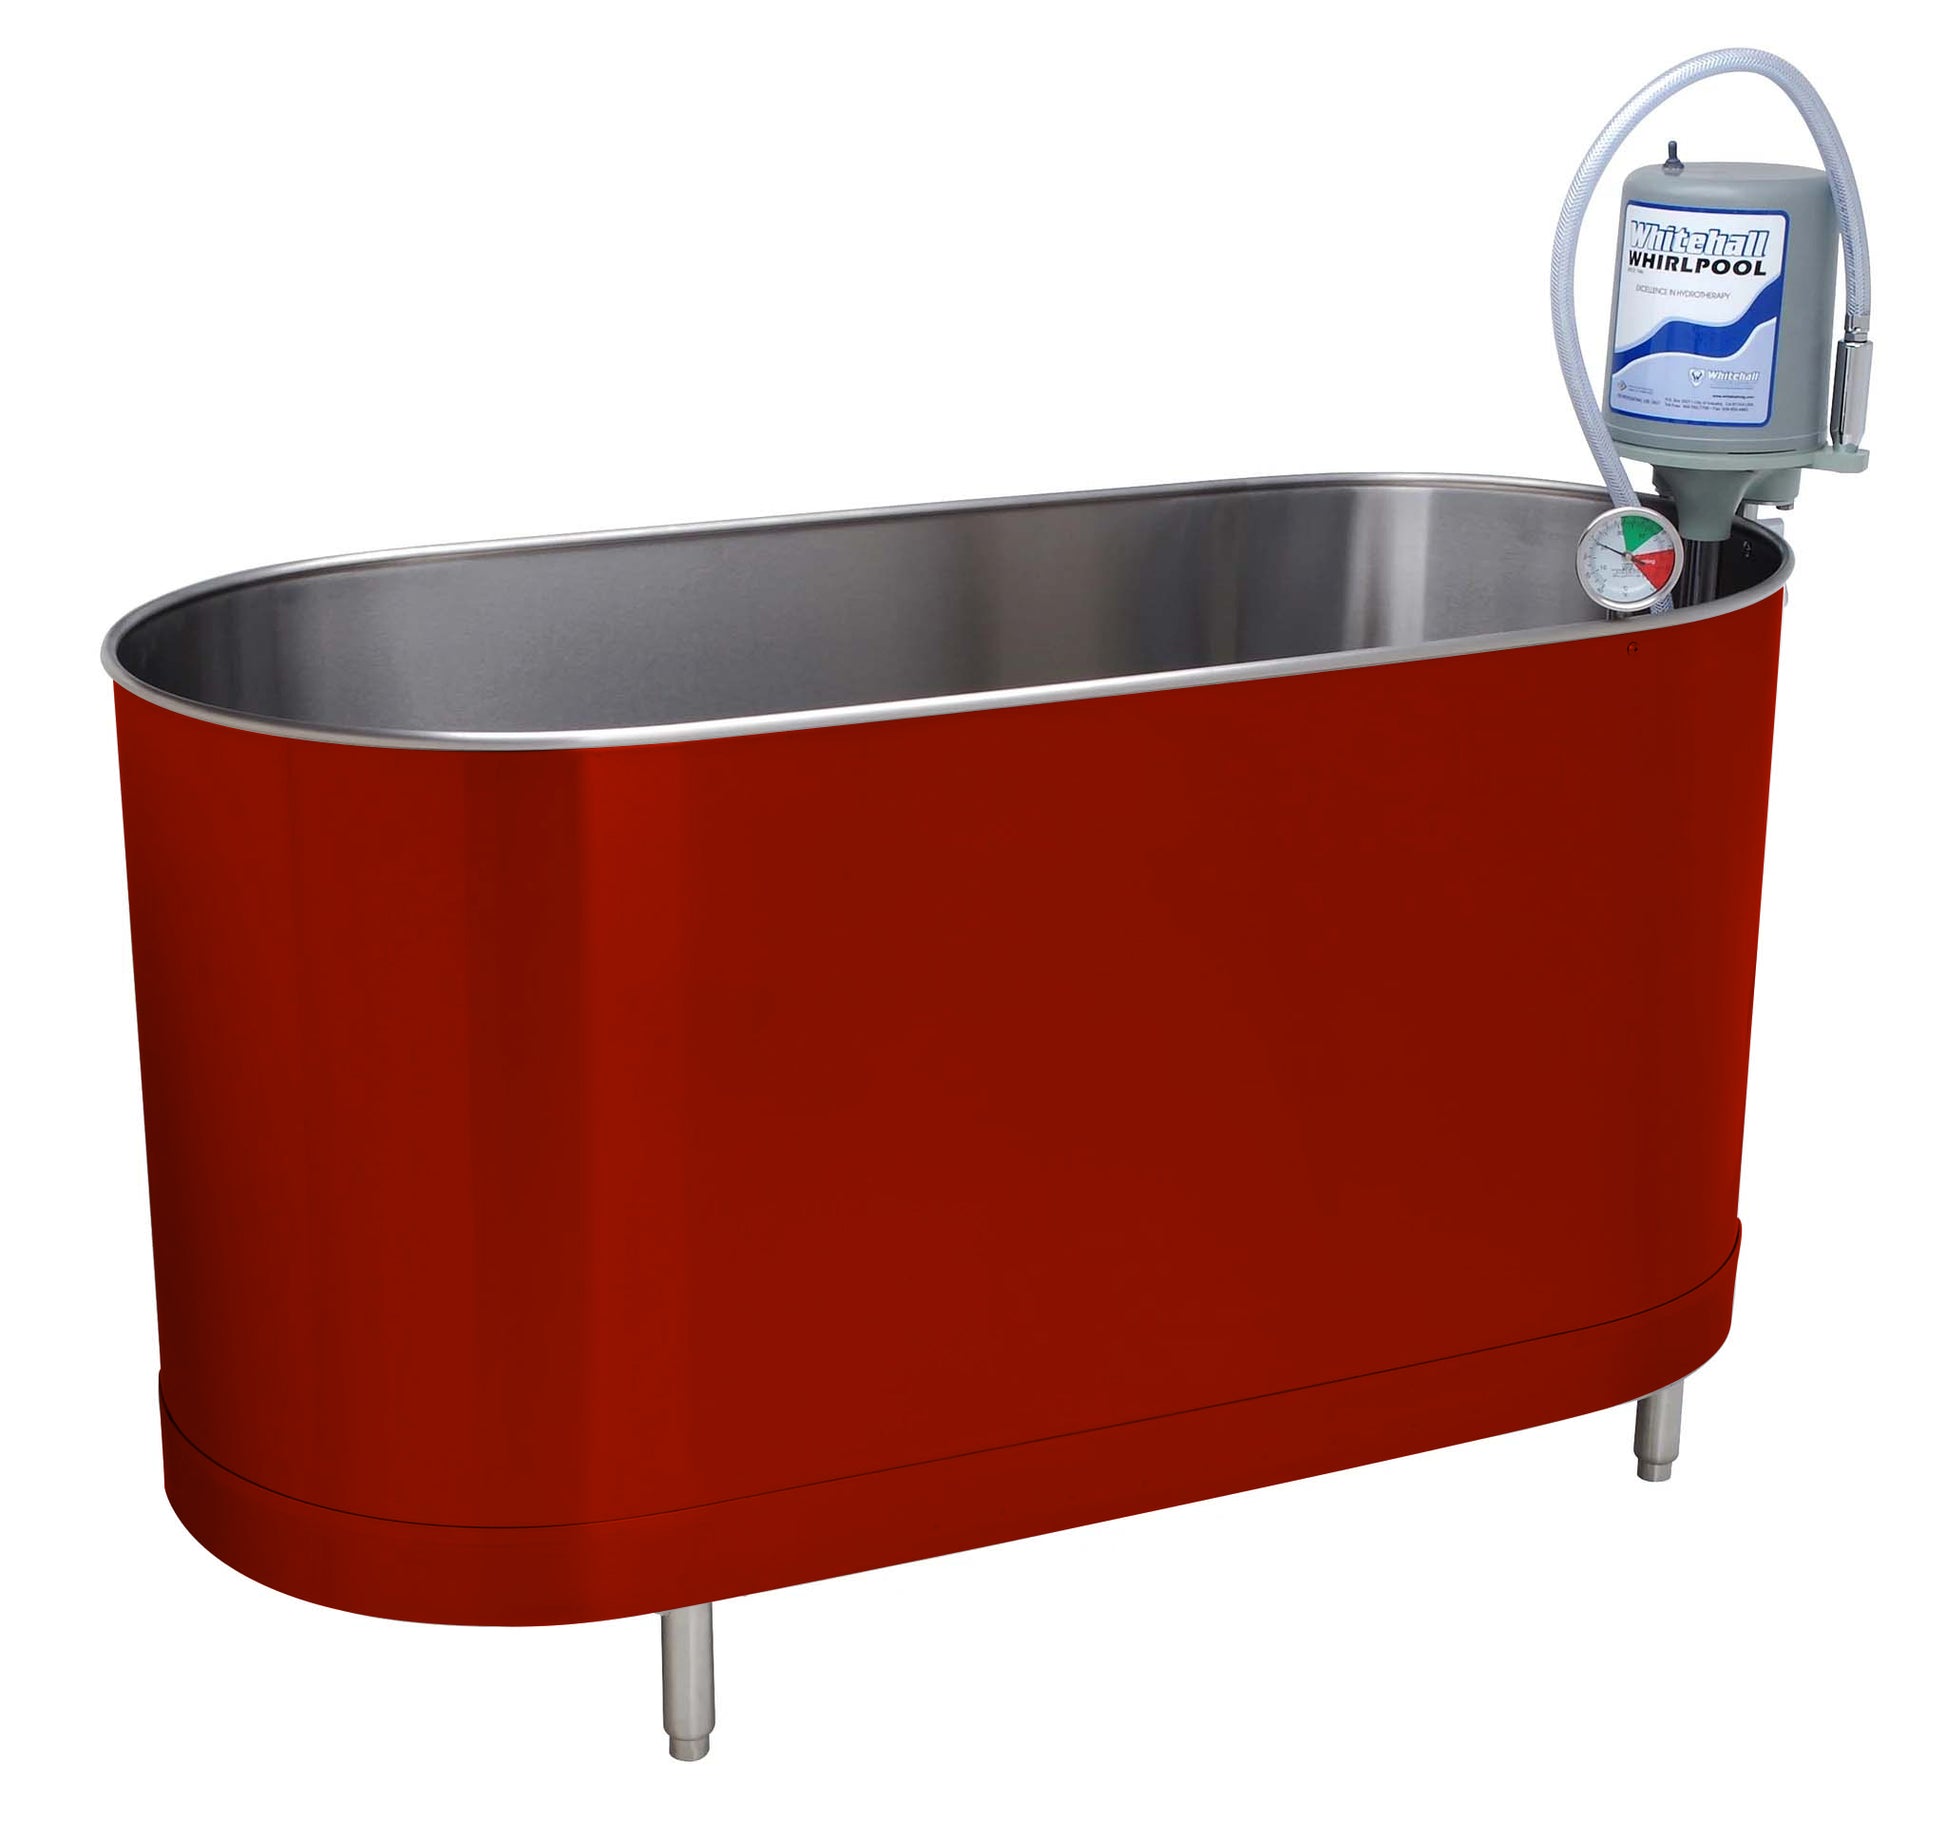 Firehouse Red Whitehall S-85-SL 85 Gallons Stationary Whirlpool with Legs